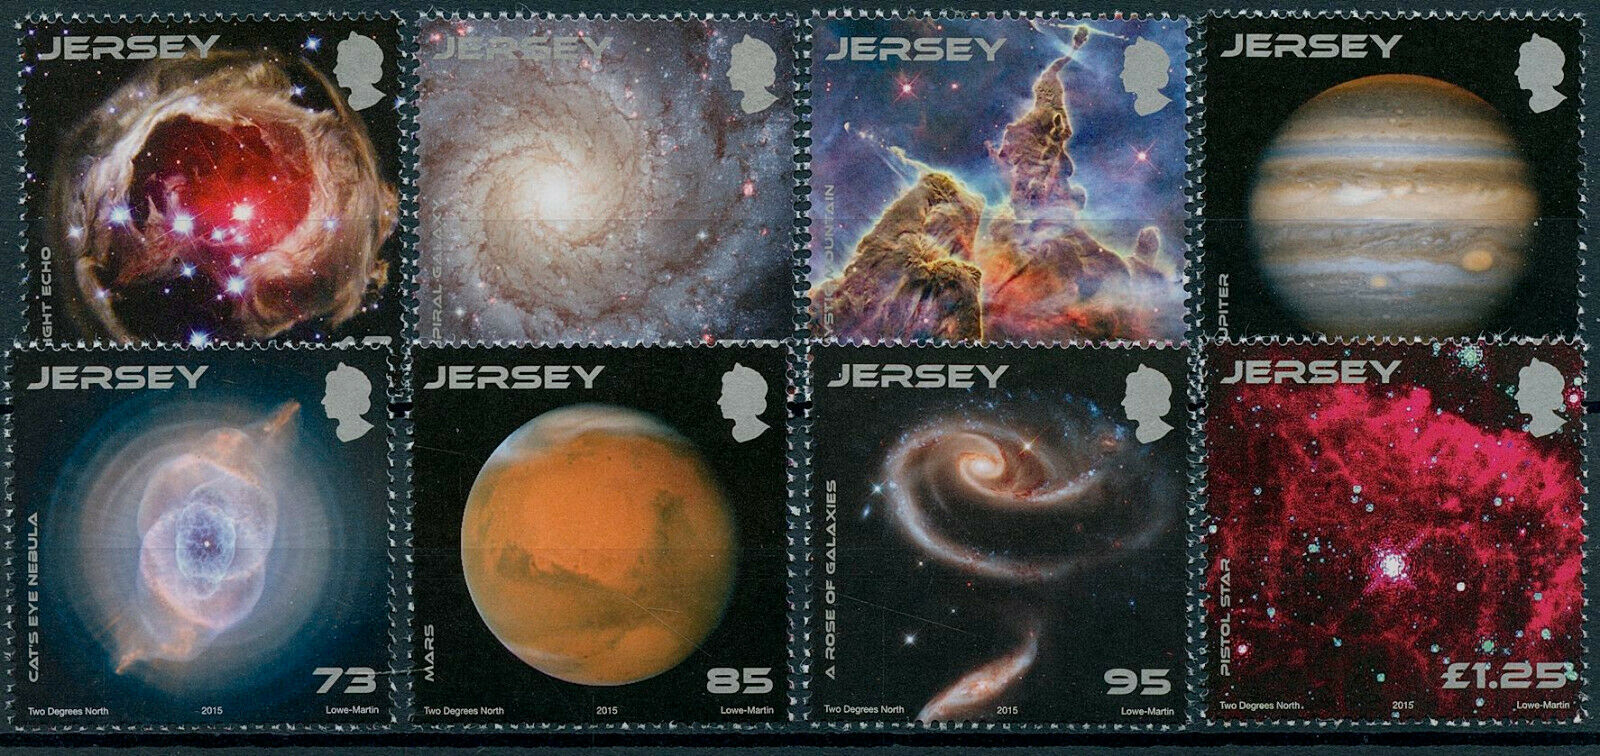 Jersey 2015 MNH Space Stamps Launch Hubble Telescope Planets Astronomy 8v Set